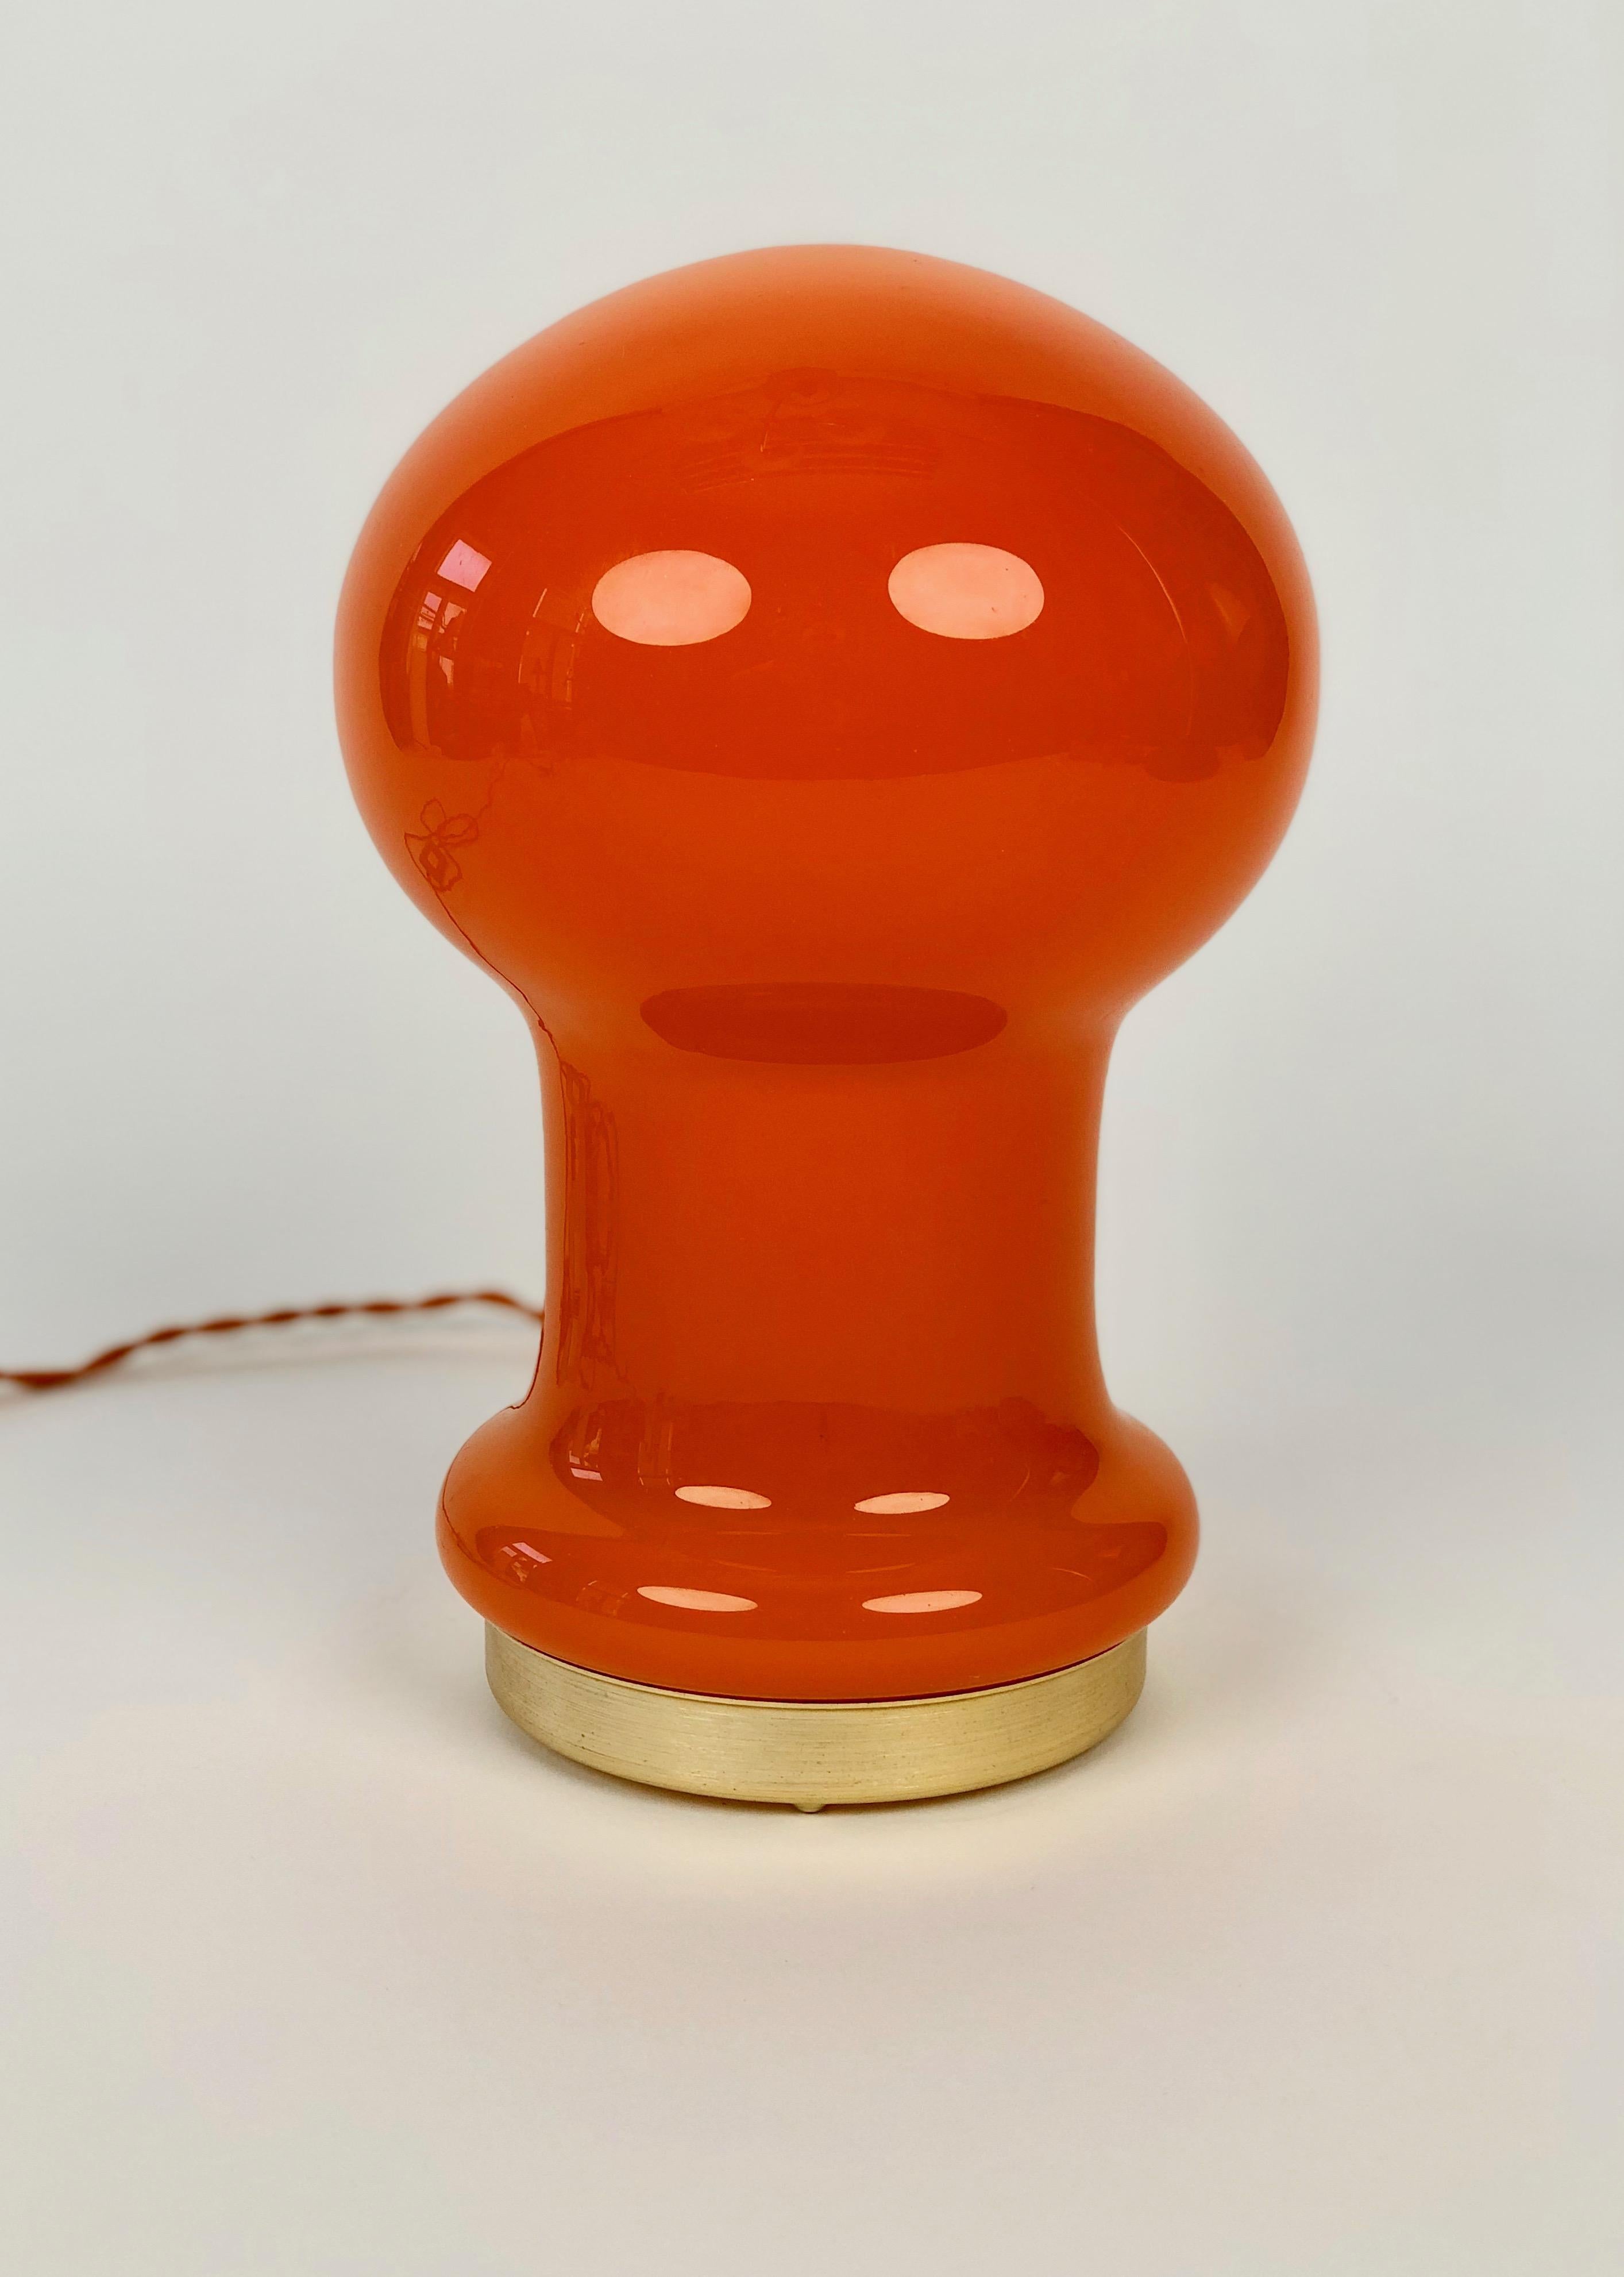 A beautiful orange, opaline glass table lamp produced by OPP Jihlava and designed by Štepán Tabery in the 1970's in Czechoslovakia.

The metal base is made from  brass coloured aluminium;  the new silk cable in orange, gives the lamp a funky